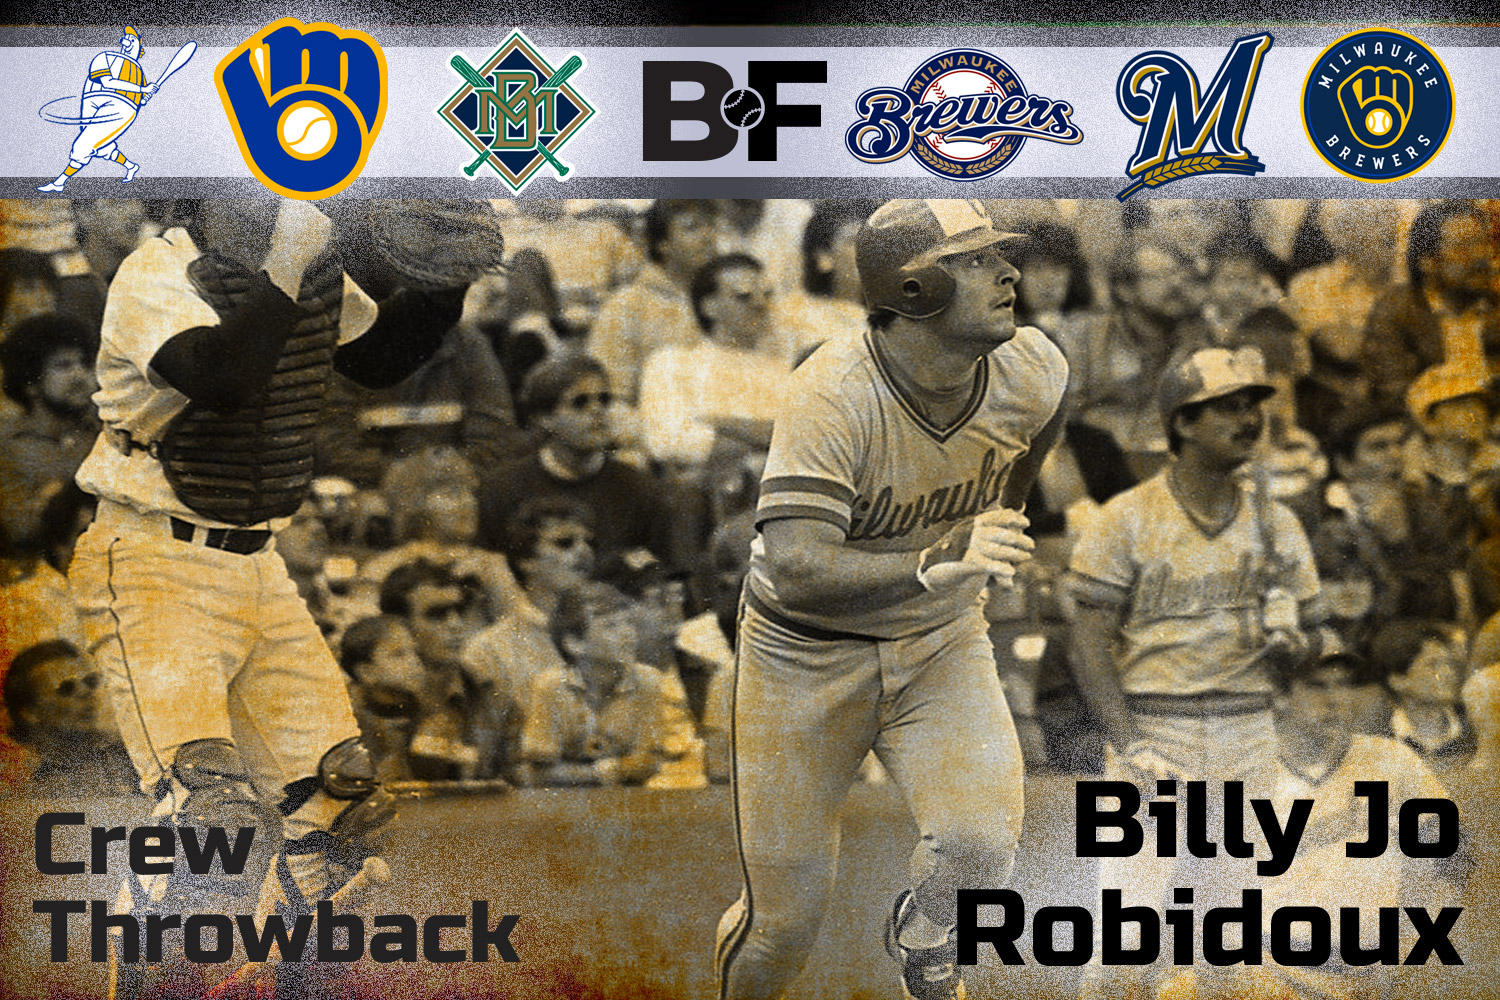 Billy Jo Robidoux Produced One of the Finest Minor League Seasons in Brewers  History - Brewers - Brewer Fanatic